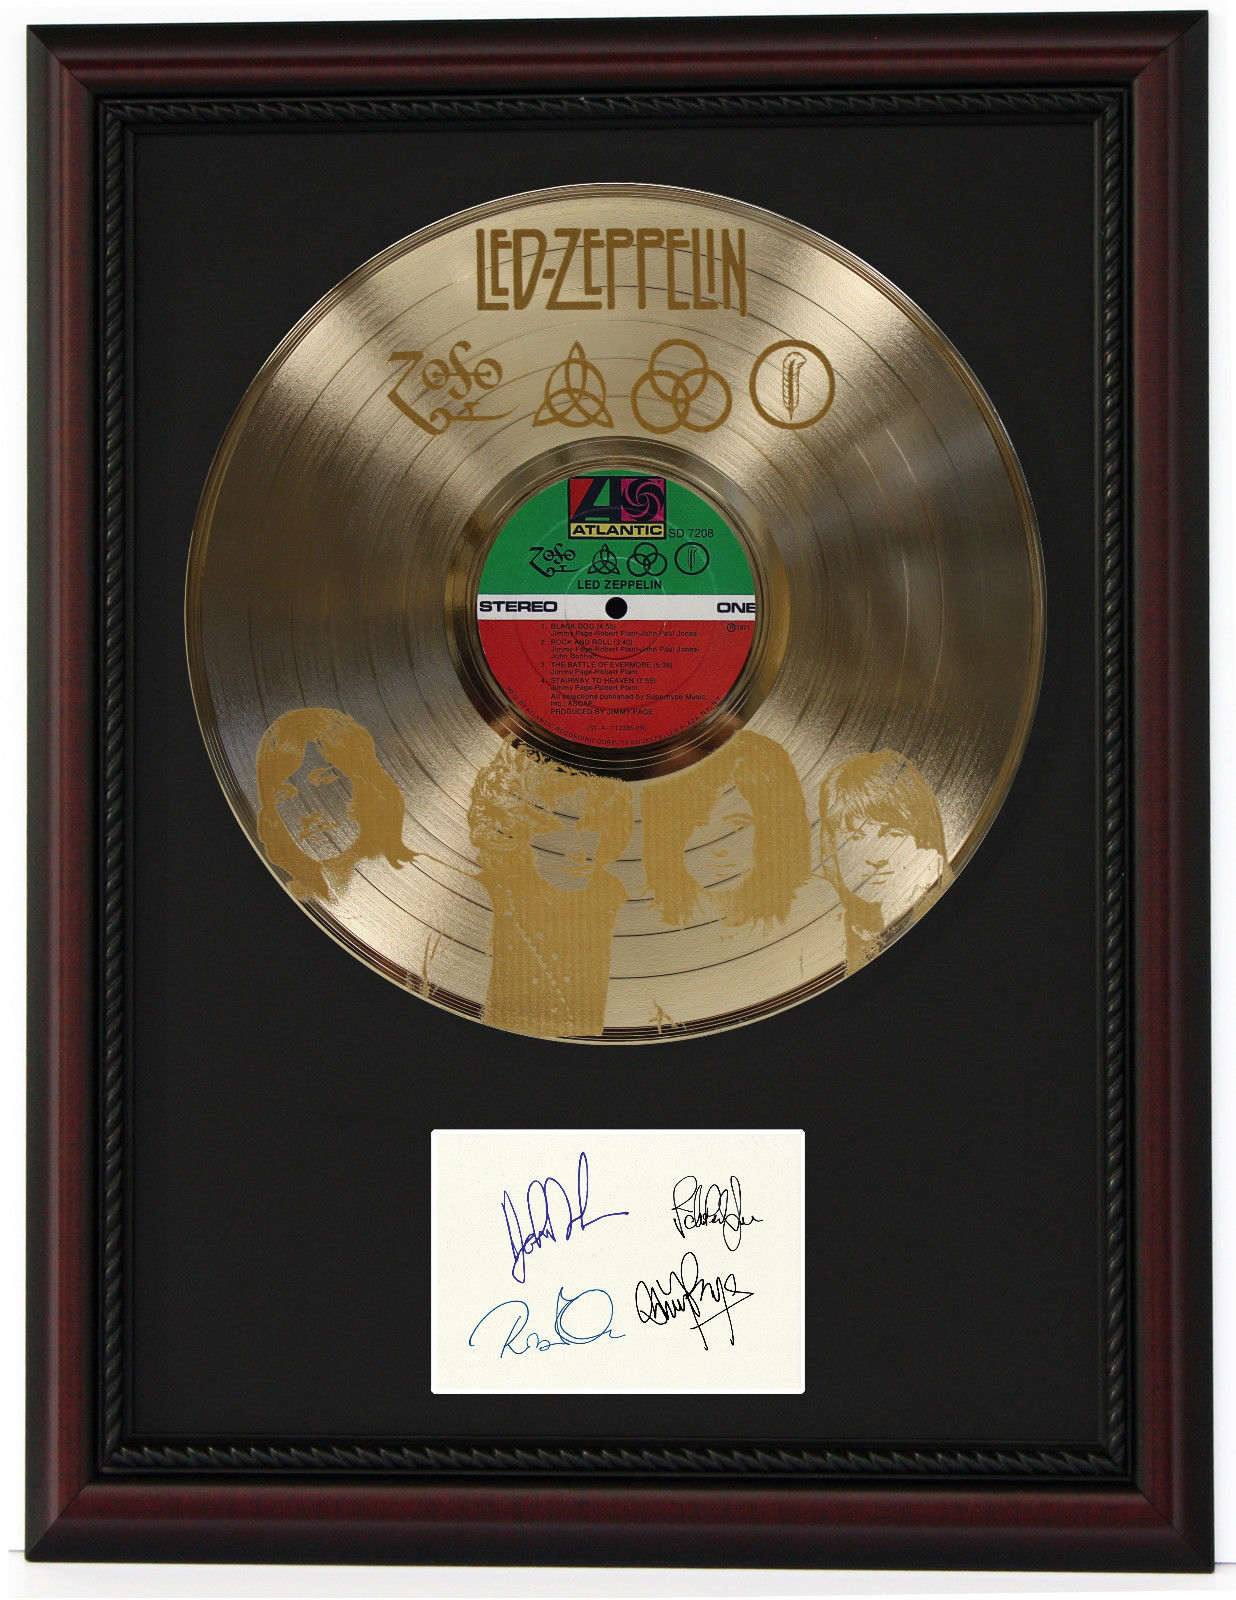 Activate charm Melodious Led Zeppelin Cherry Wood Gold LP Record Framed Etched Signature Display C3  - Gold Record Outlet Album and Disc Collectible Memorabilia